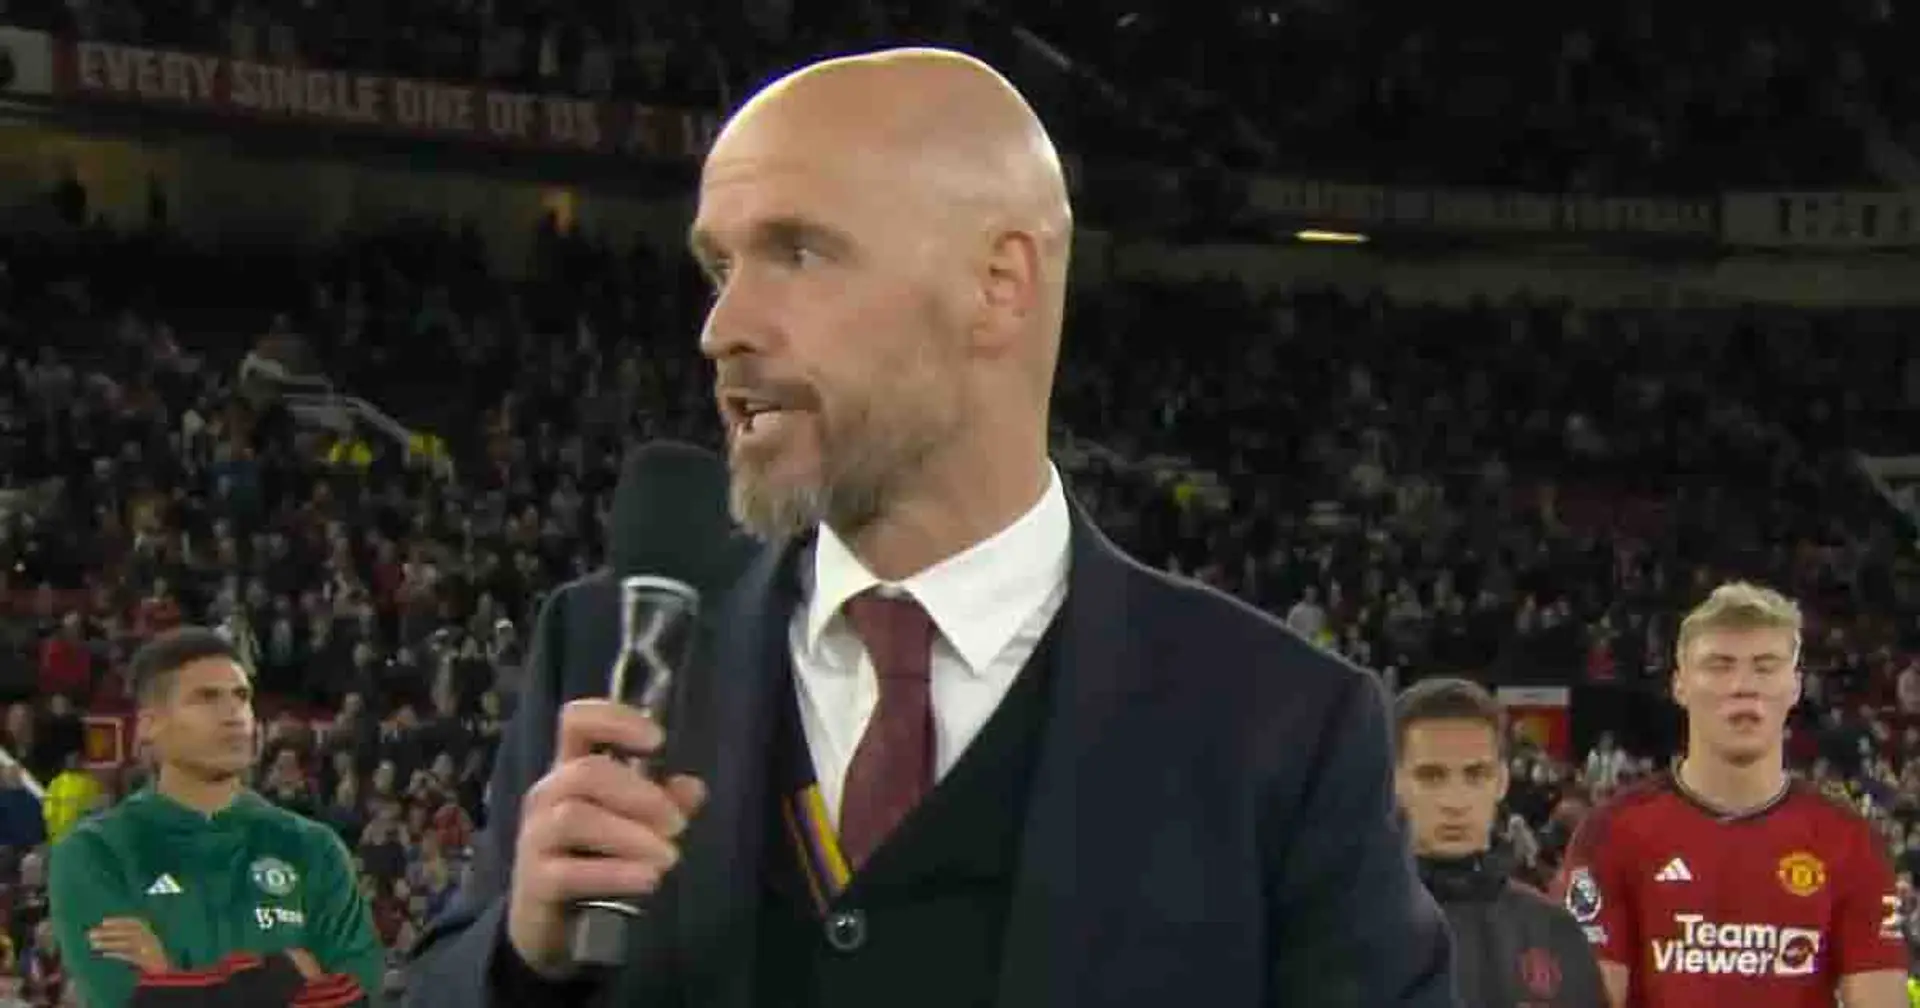 Erik ten Hag silences boos in inspiring rally cry for Man United supporters before FA CUp final